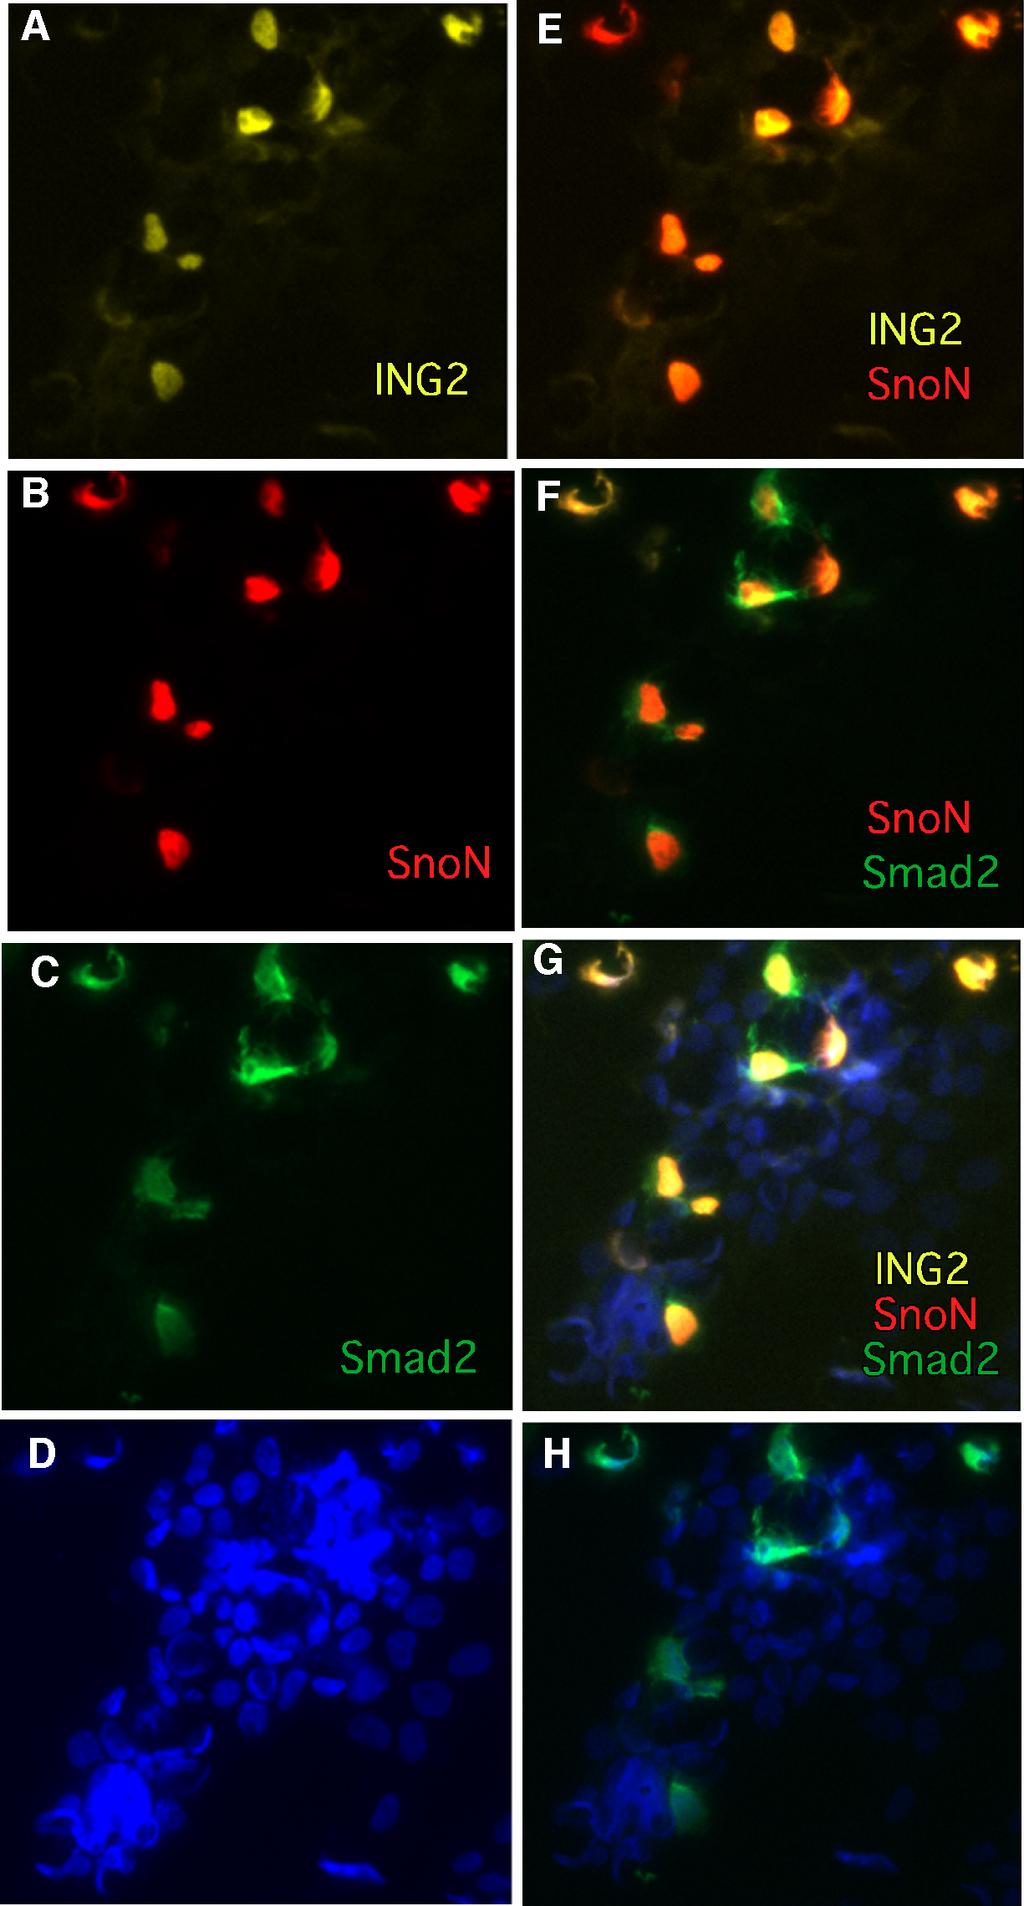 Sarker et al.. Supplementary Fig. 6. ING2 colocalizes with SnoN and Smad2 in the nucleus.